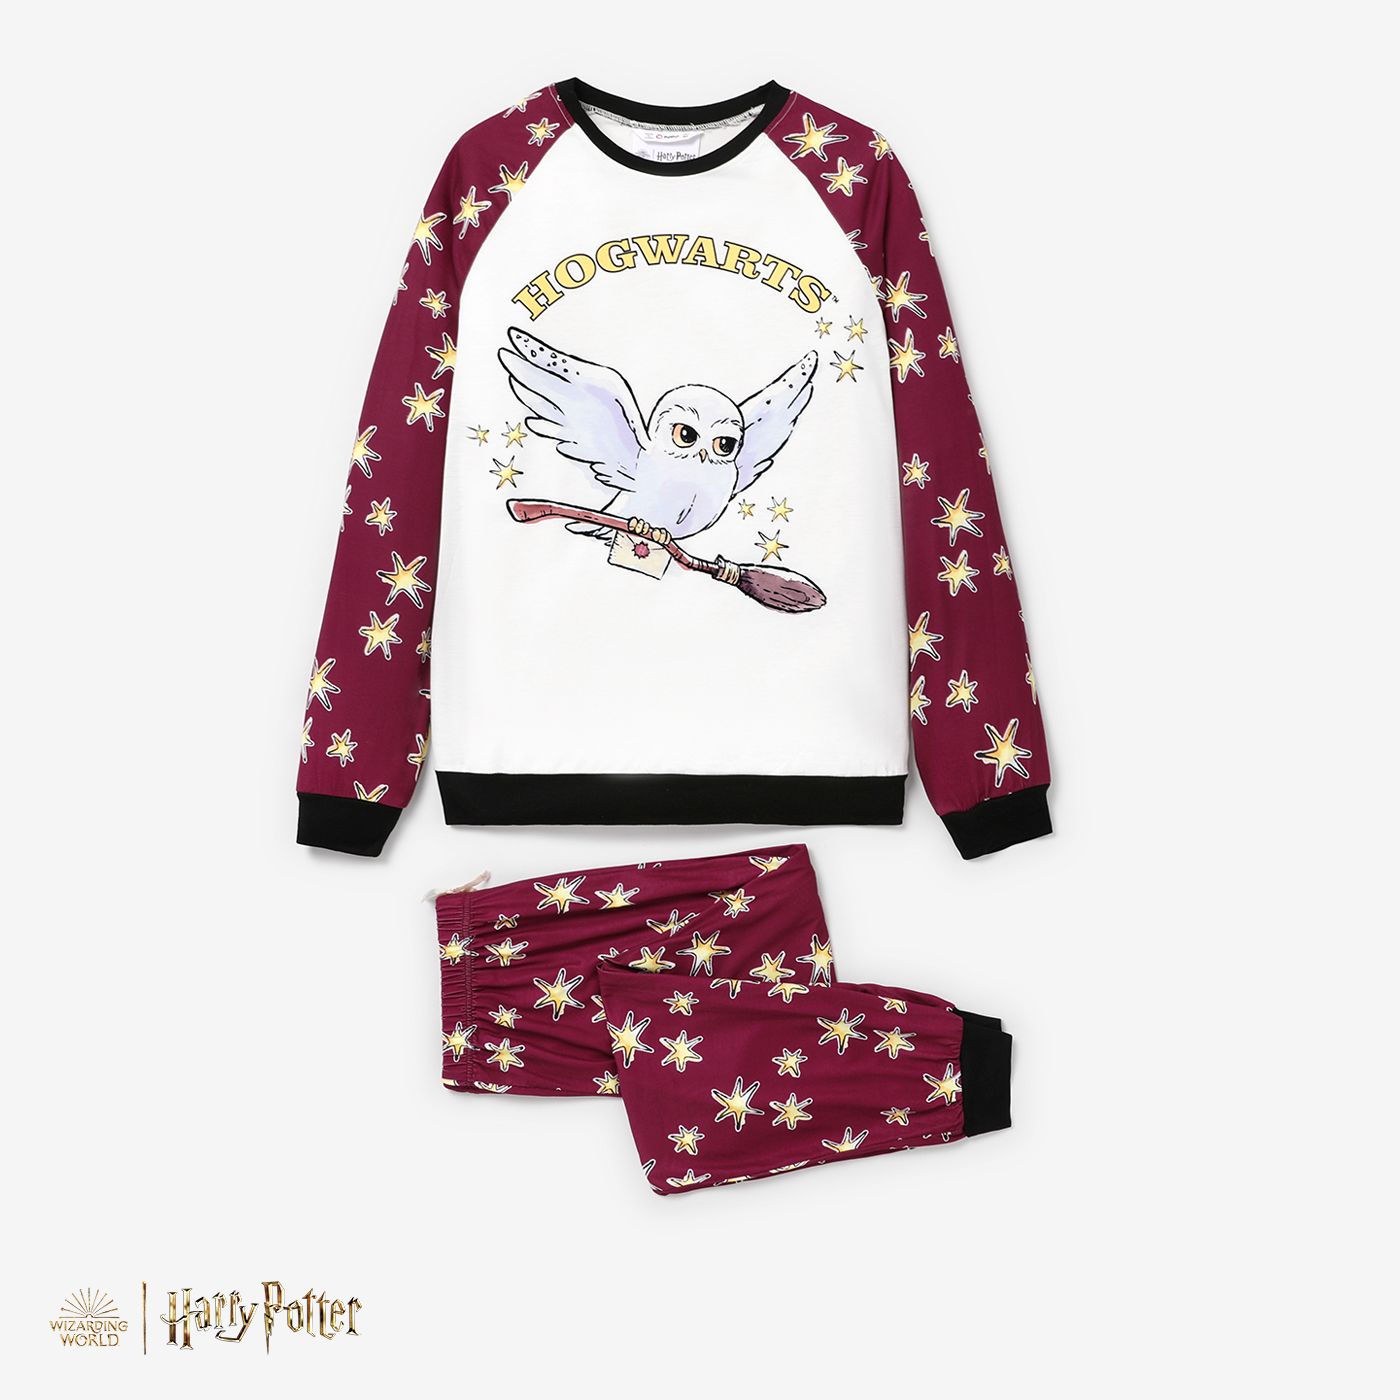 Harry Potter Christmas Family Matching Letter& Character Print Long-sleeve Pajamas Sets (Flame Resistant)